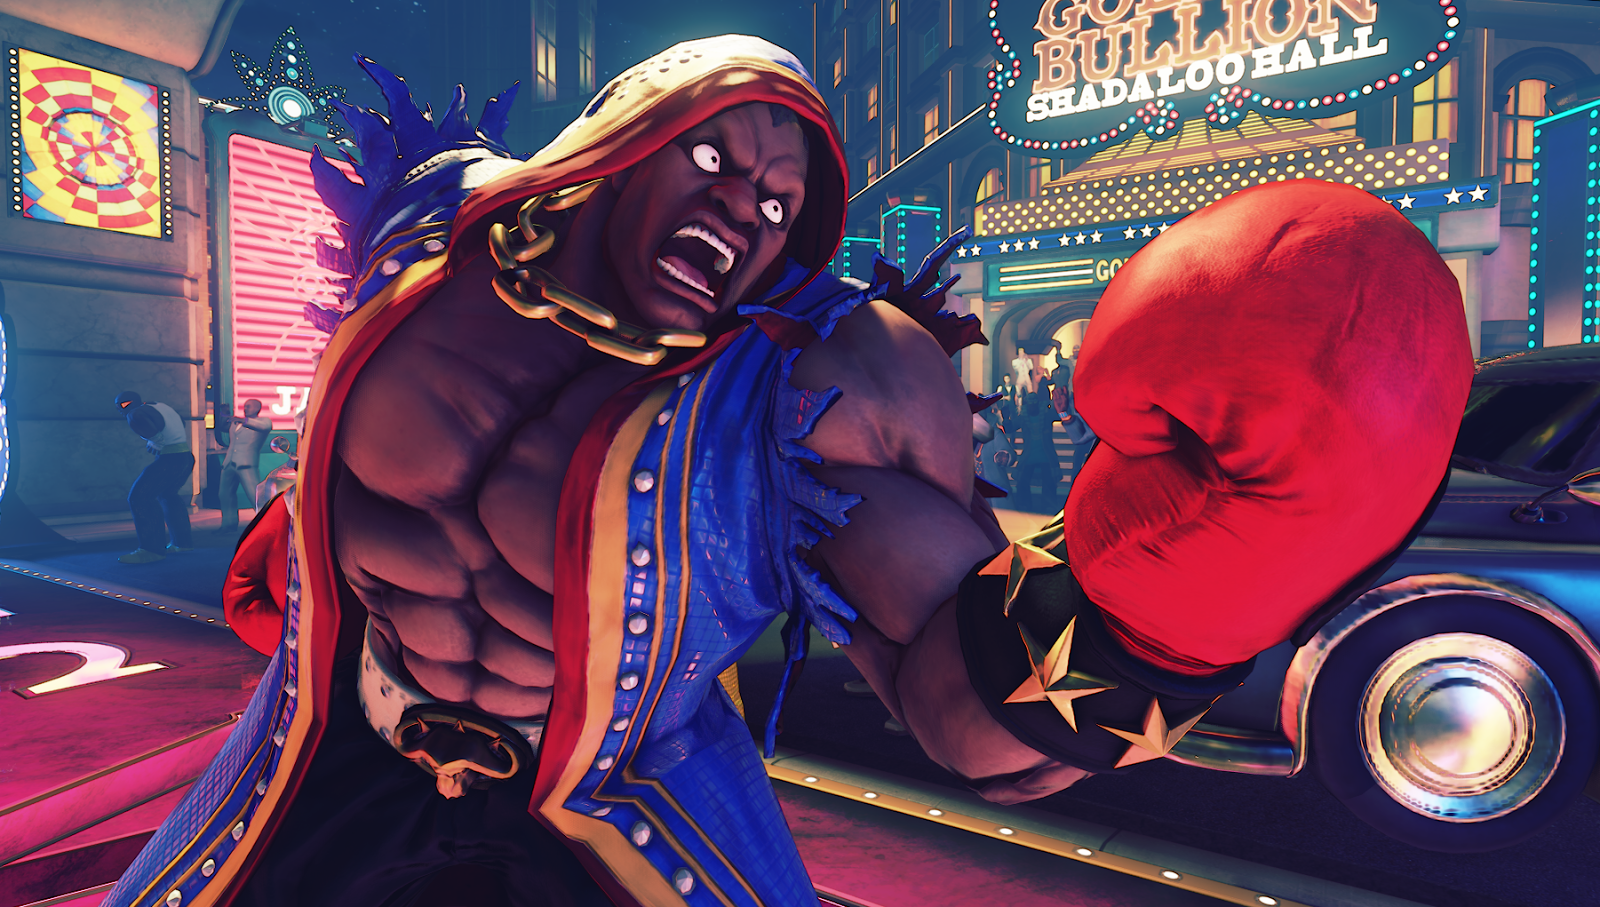 What To Watch For This Weekend At Evo 2017, The World’s Largest Fighting Game Tournament